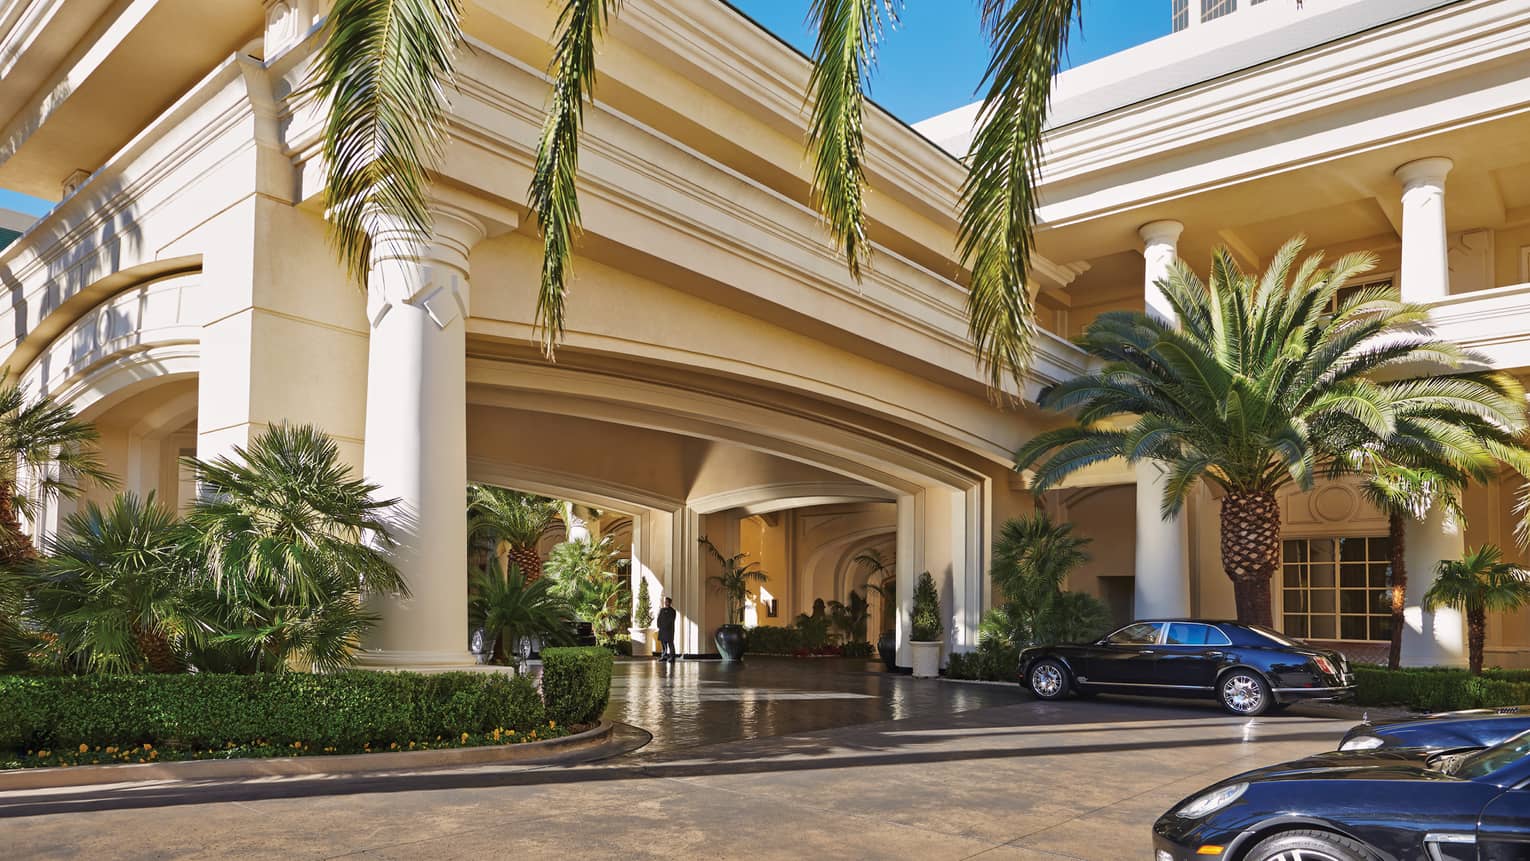 Luxury car parked by palm tree, large white pillars and front hotel entrance